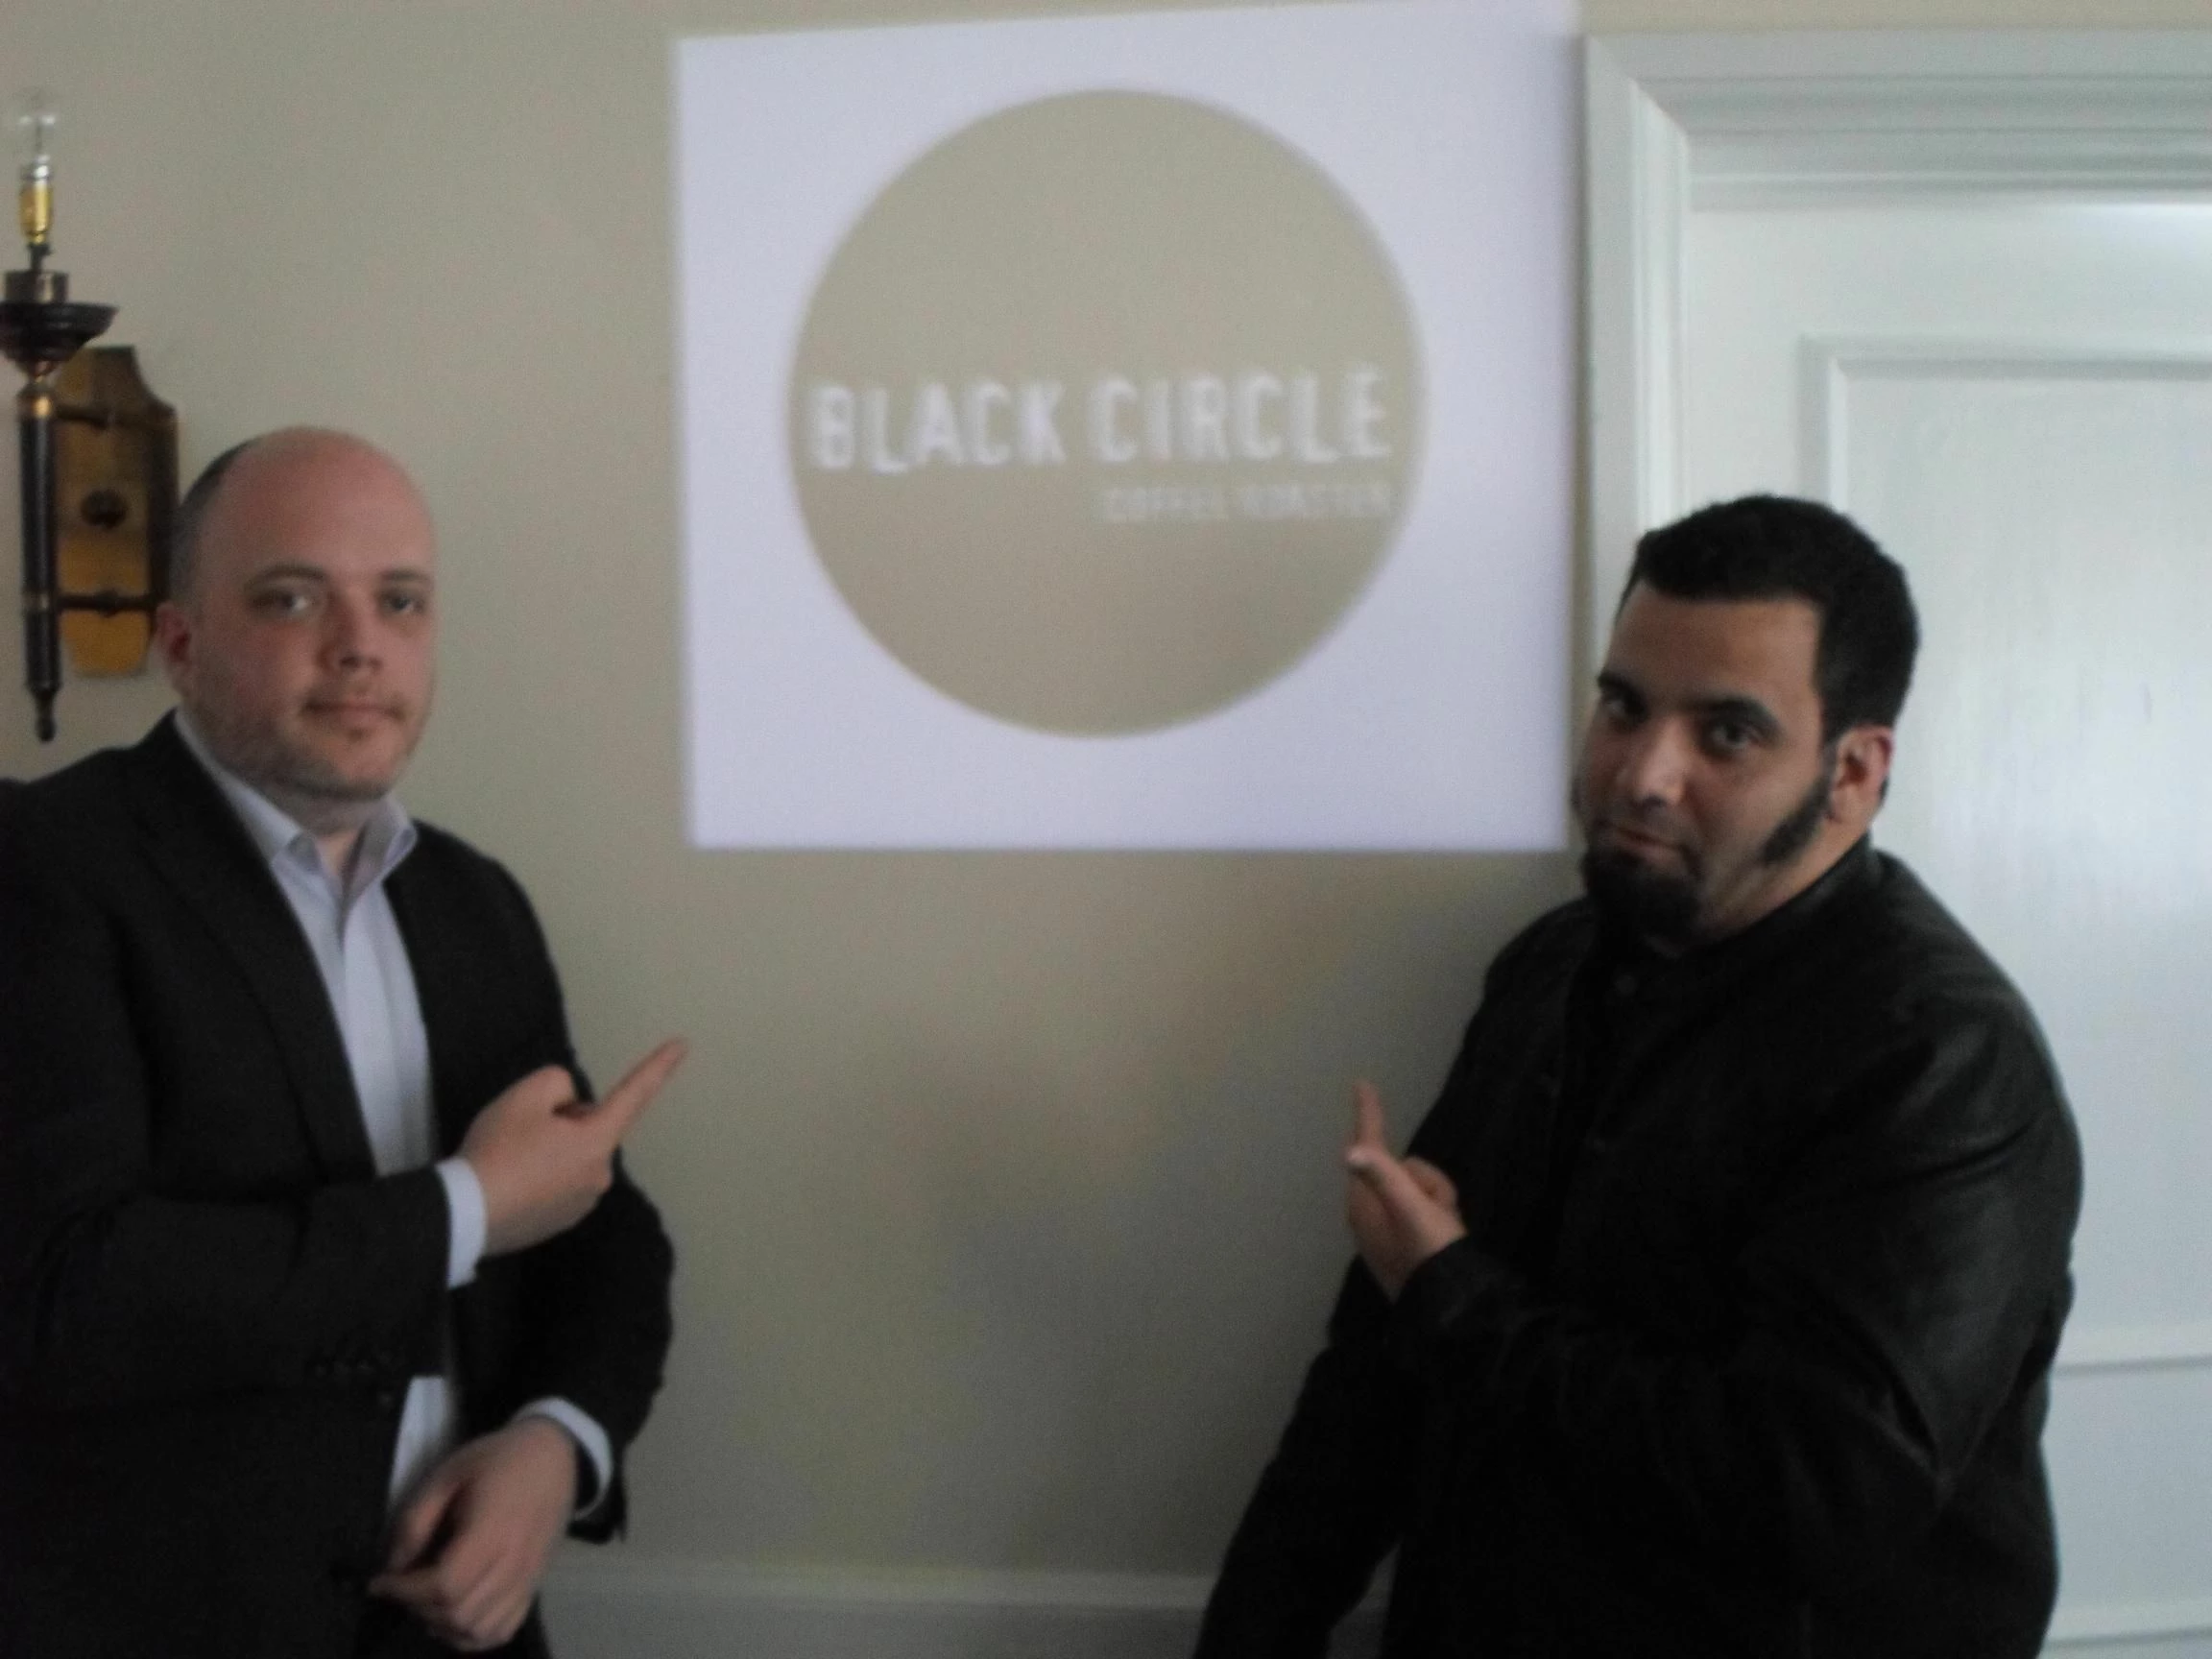 Jesse McClure has put his name to  Sideburns Bold from Black Circle Coffee